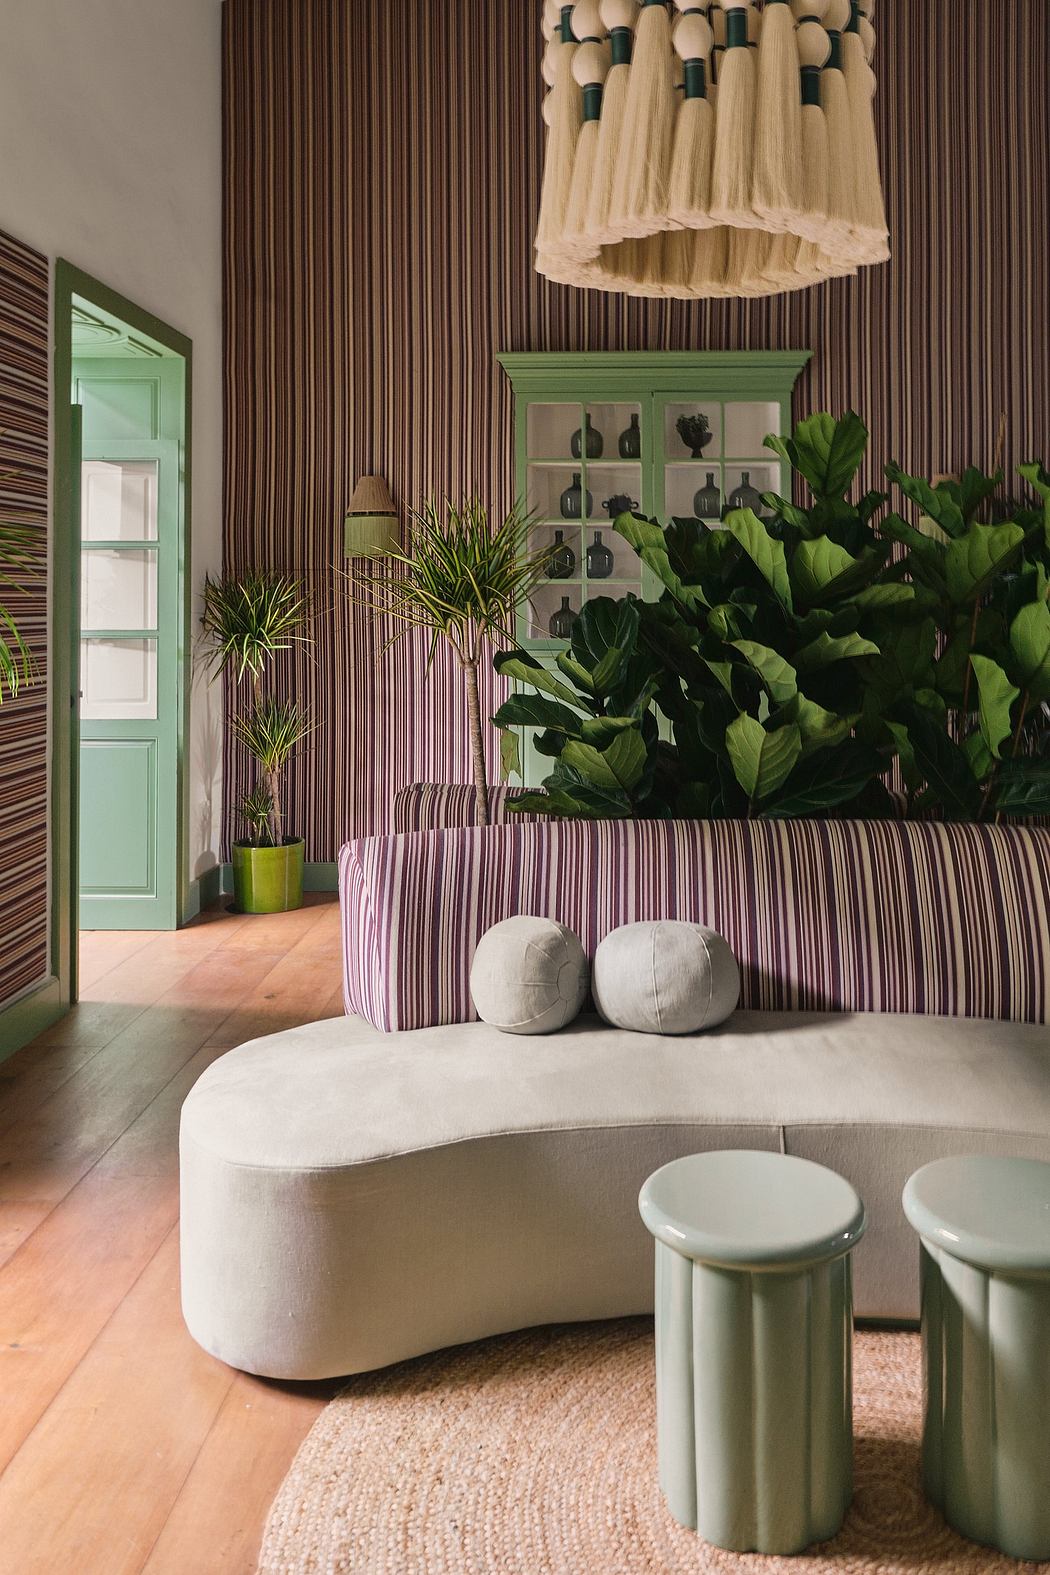 A vibrant, nature-inspired interior design with plush seating, greenery, and bold color accents.